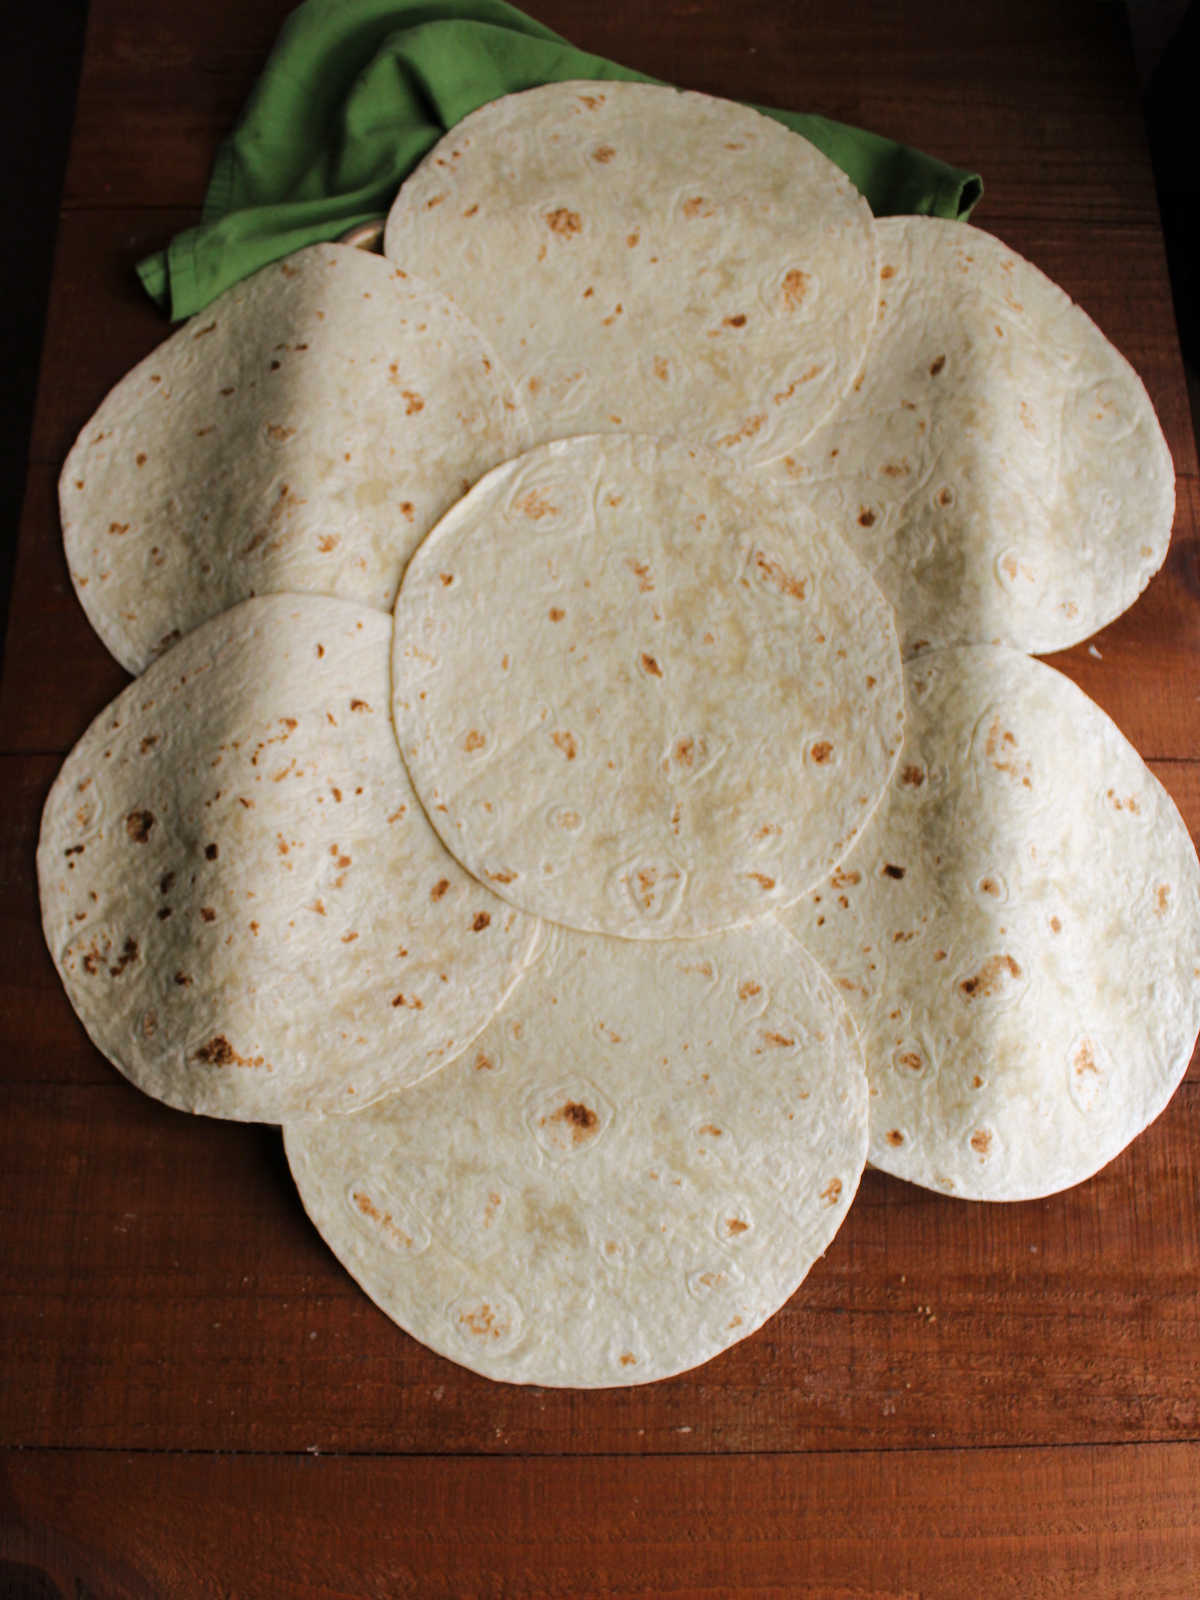 Sheet pan covered with large tortillas to make the bottom of the quesadilla.